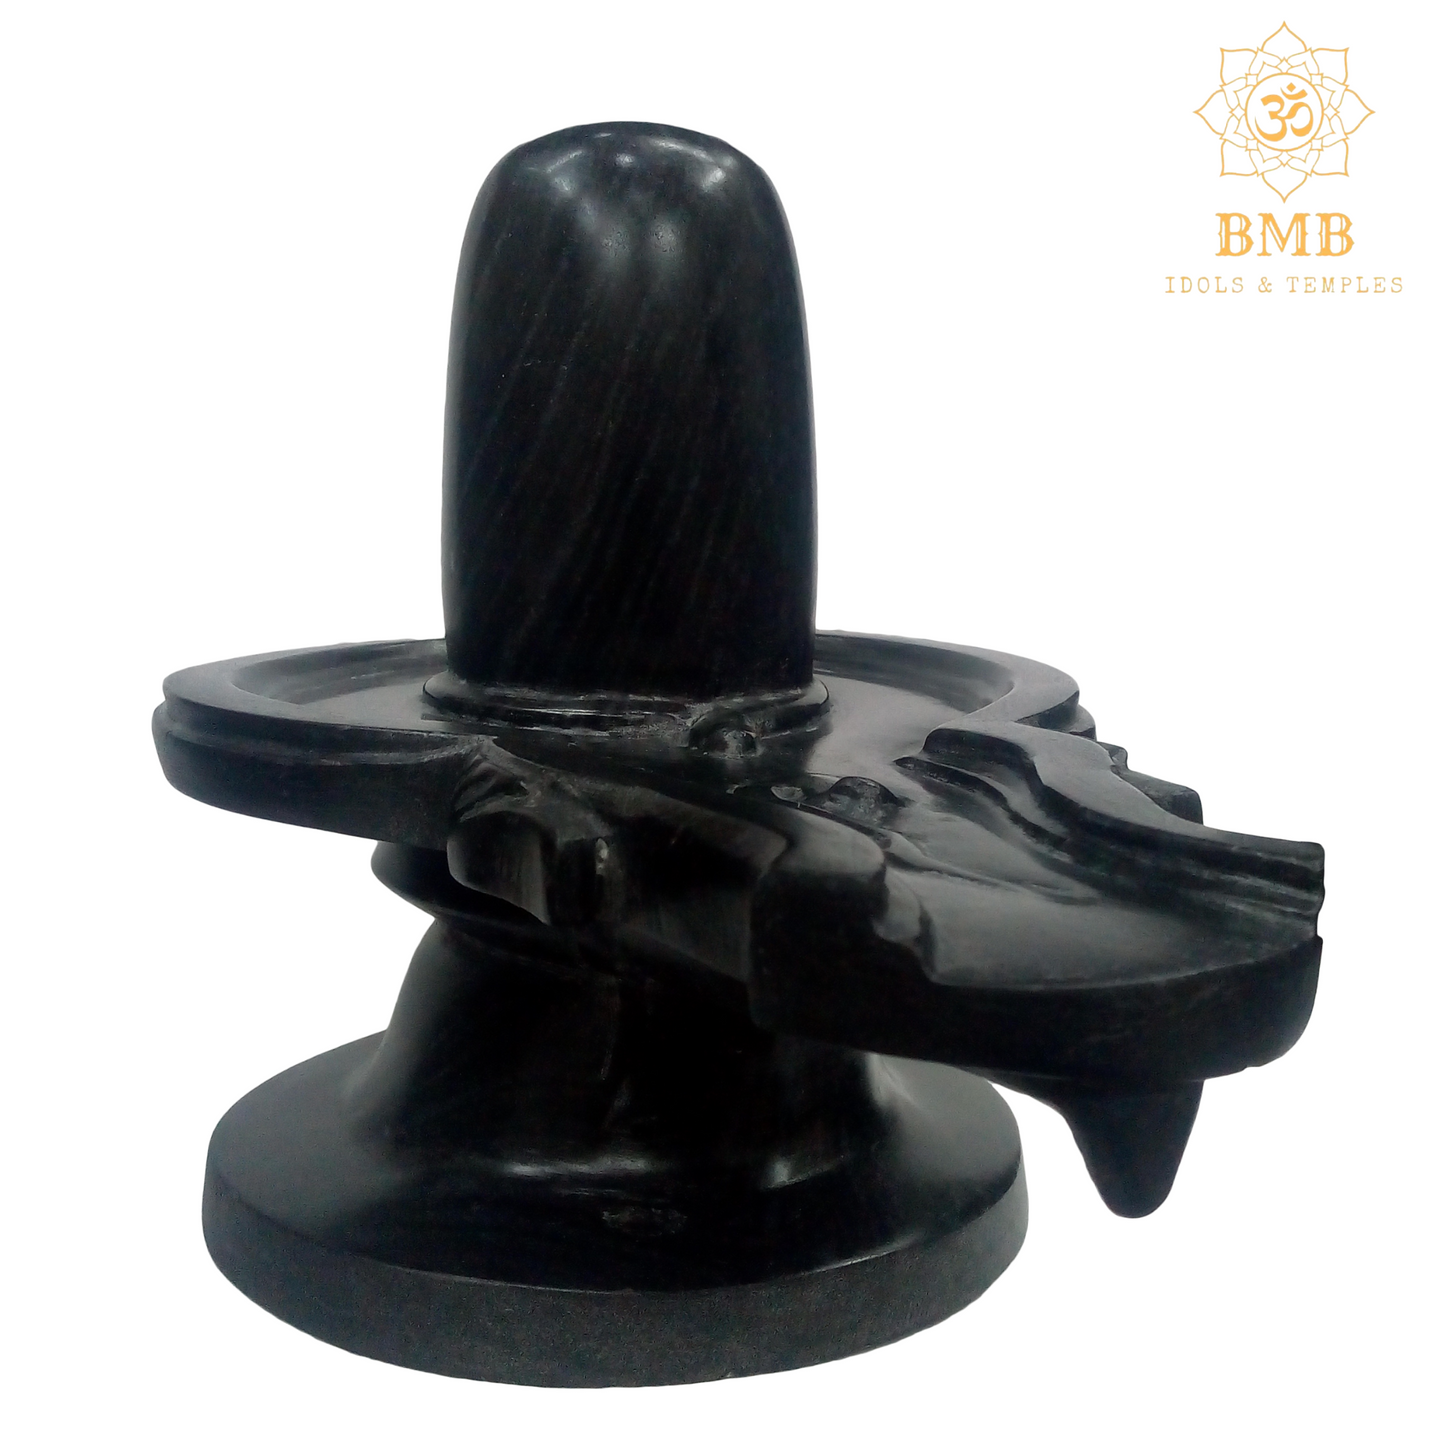 Shivling Statue in pure Black Stone the statue of Lord Shiva